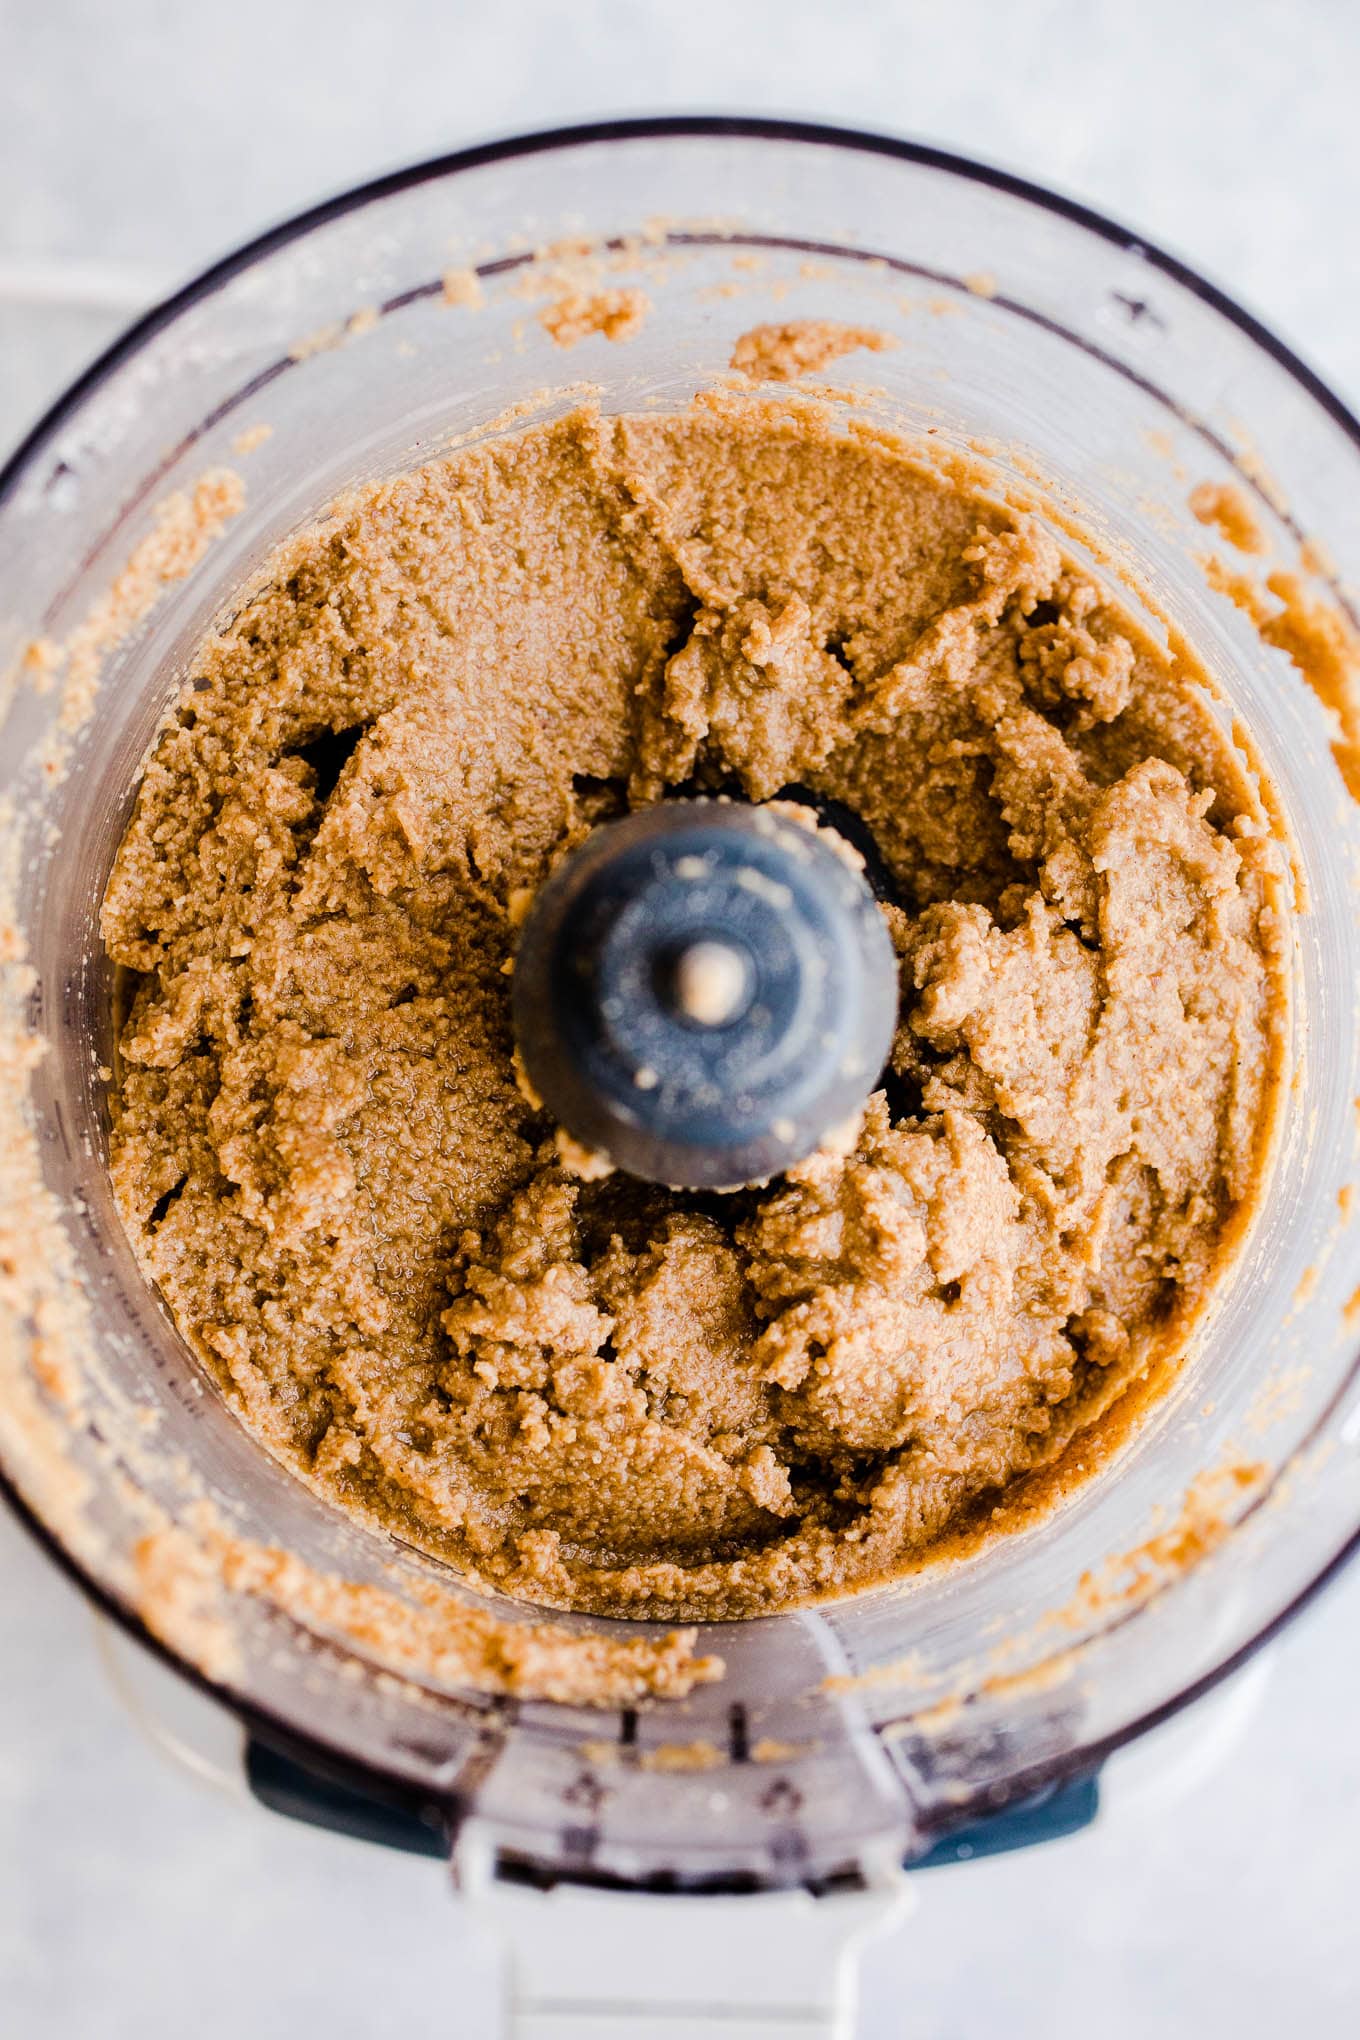 oatmeal butter in a food processor.